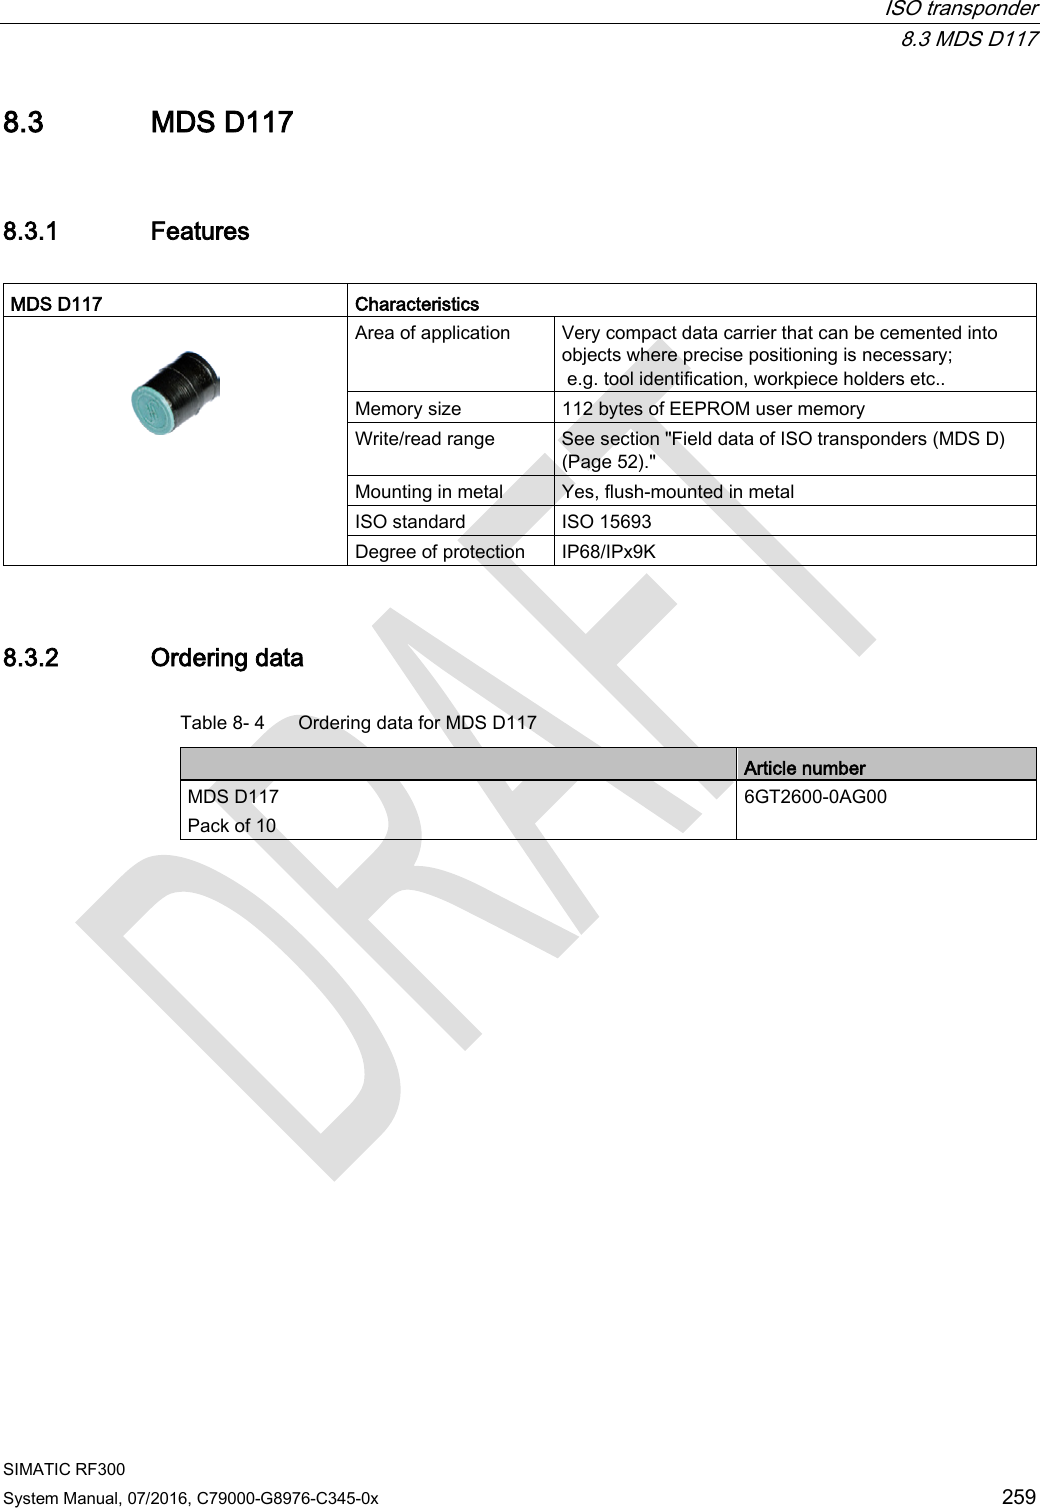  ISO transponder  8.3 MDS D117 SIMATIC RF300 System Manual, 07/2016, C79000-G8976-C345-0x 259 8.3 MDS D117 8.3.1 Features  MDS D117 Characteristics   Area of application Very compact data carrier that can be cemented into objects where precise positioning is necessary;  e.g. tool identification, workpiece holders etc.. Memory size 112 bytes of EEPROM user memory Write/read range See section &quot;Field data of ISO transponders (MDS D) (Page 52).&quot; Mounting in metal Yes, flush-mounted in metal ISO standard ISO 15693 Degree of protection IP68/IPx9K 8.3.2 Ordering data Table 8- 4  Ordering data for MDS D117  Article number MDS D117 Pack of 10 6GT2600-0AG00 